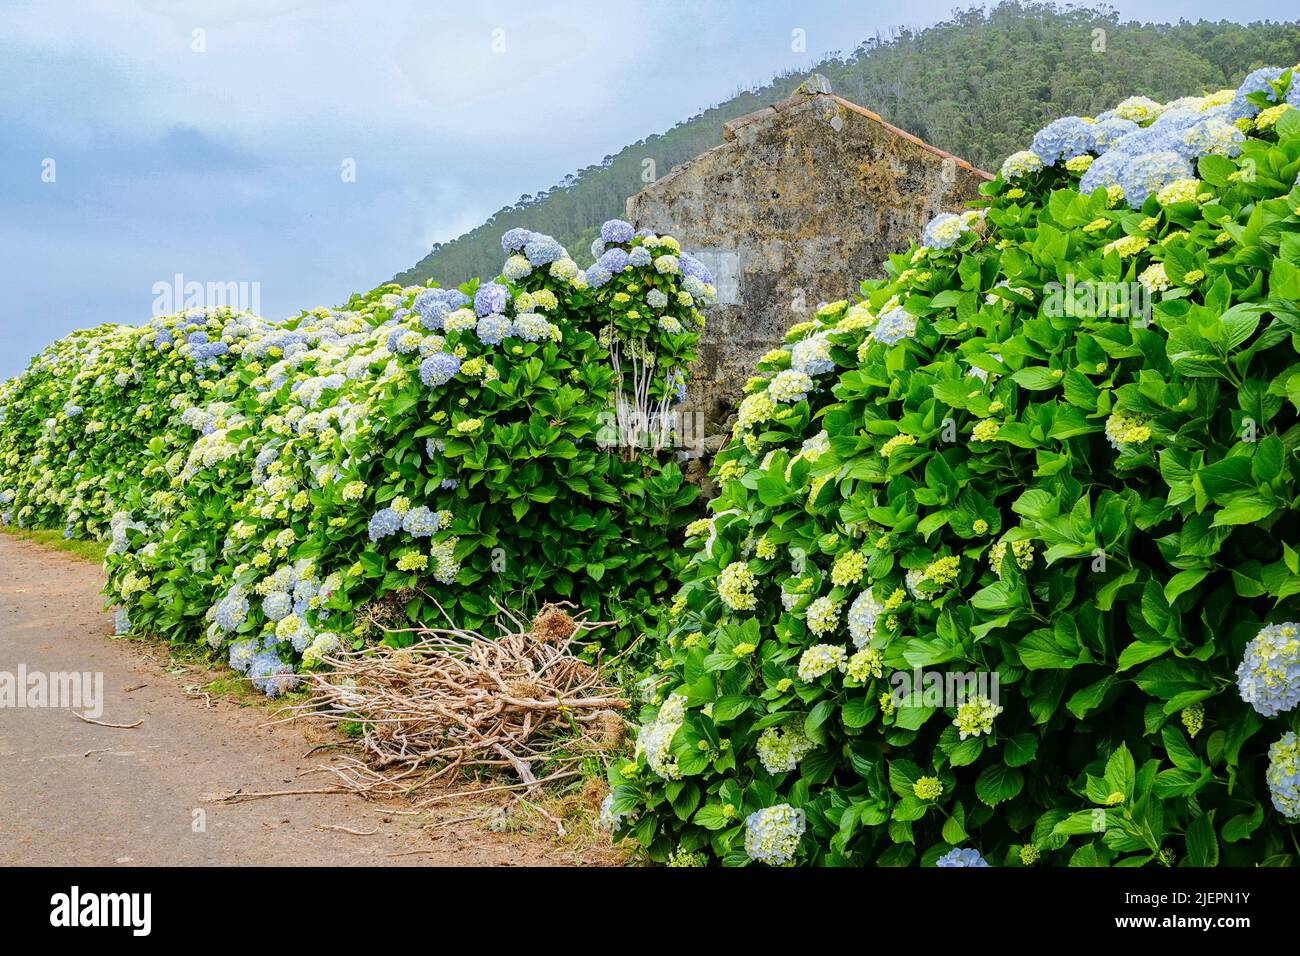 An old stone building is overwhelmed by Hydrangea flowers near Agualva, Terceira Island, Azores, Portugal. The tiny Azores are covered by wild hydrangea shrubs considered the national flower. Stock Photo